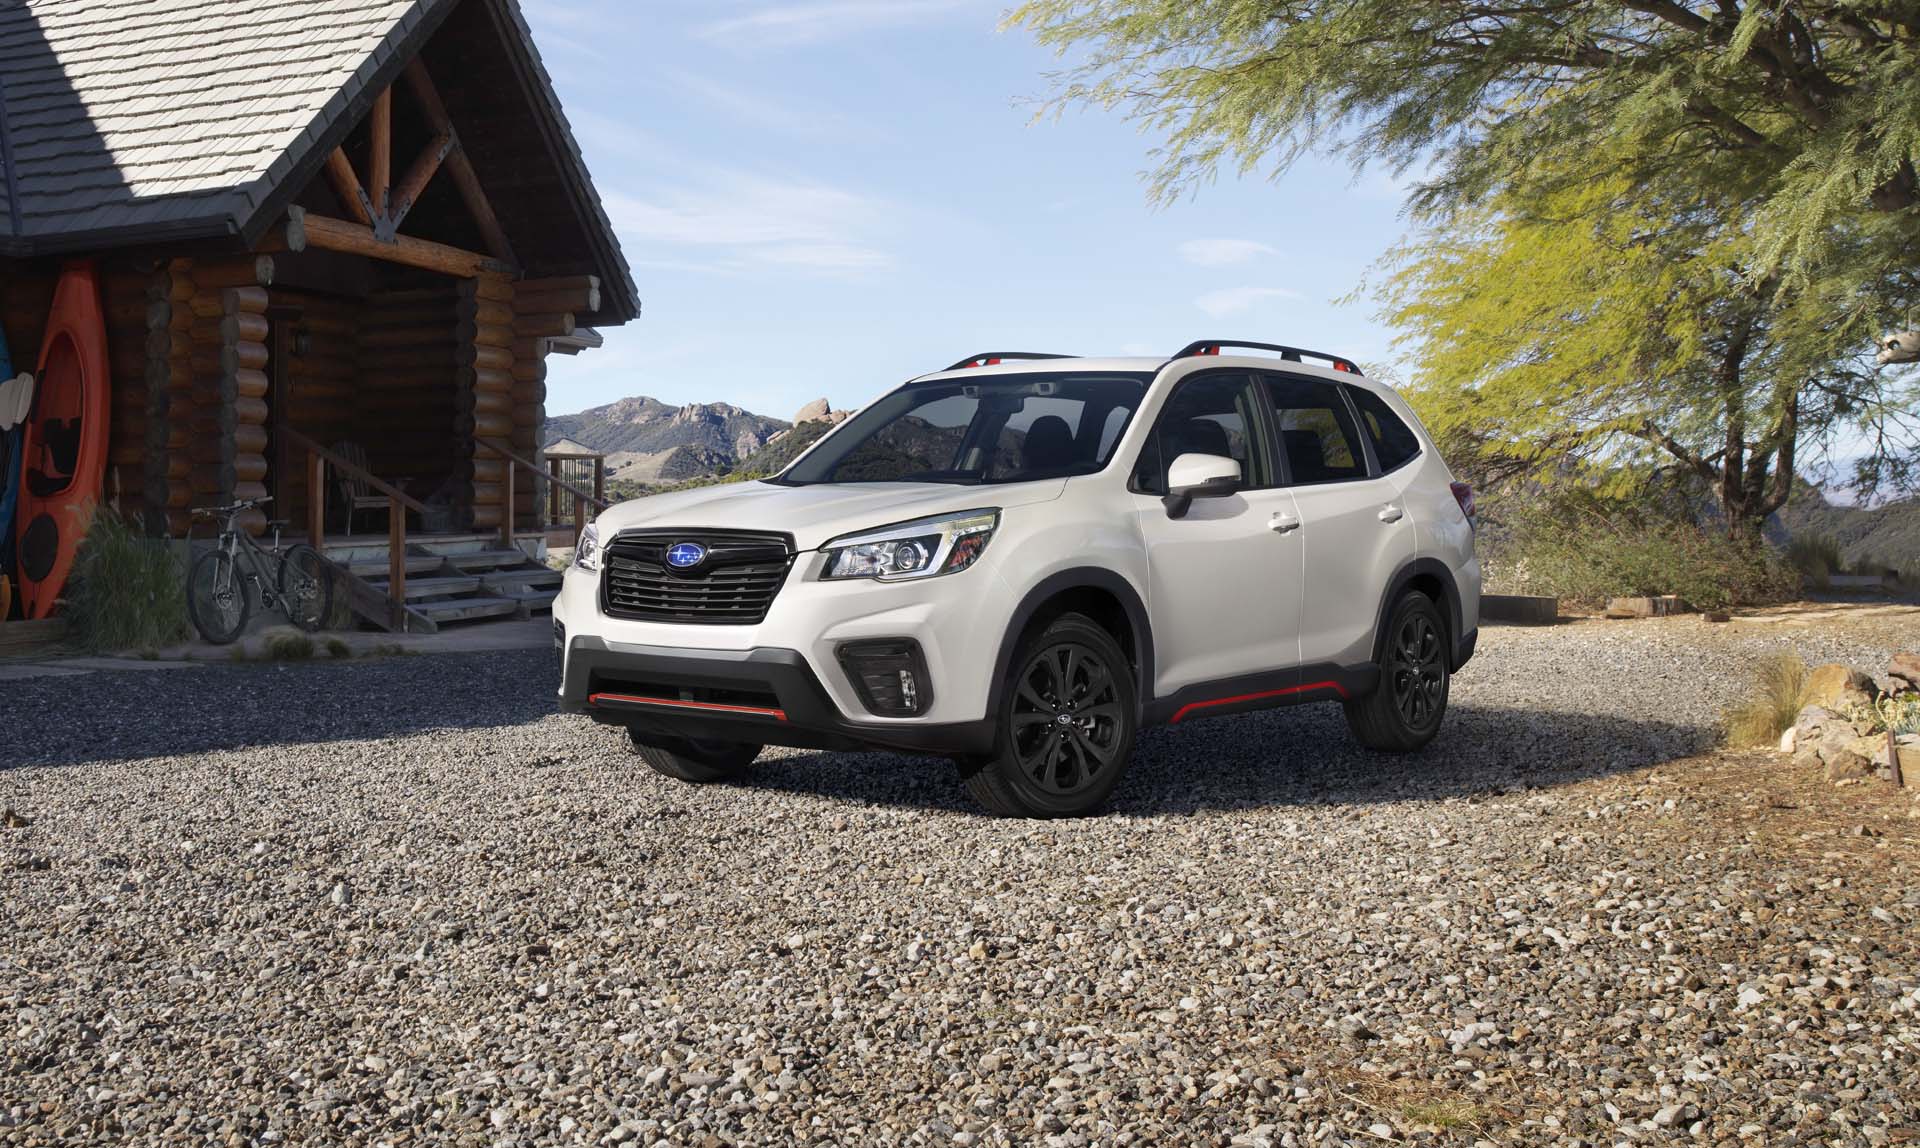 2020 Subaru Forester prices and expert review - The Car Connection